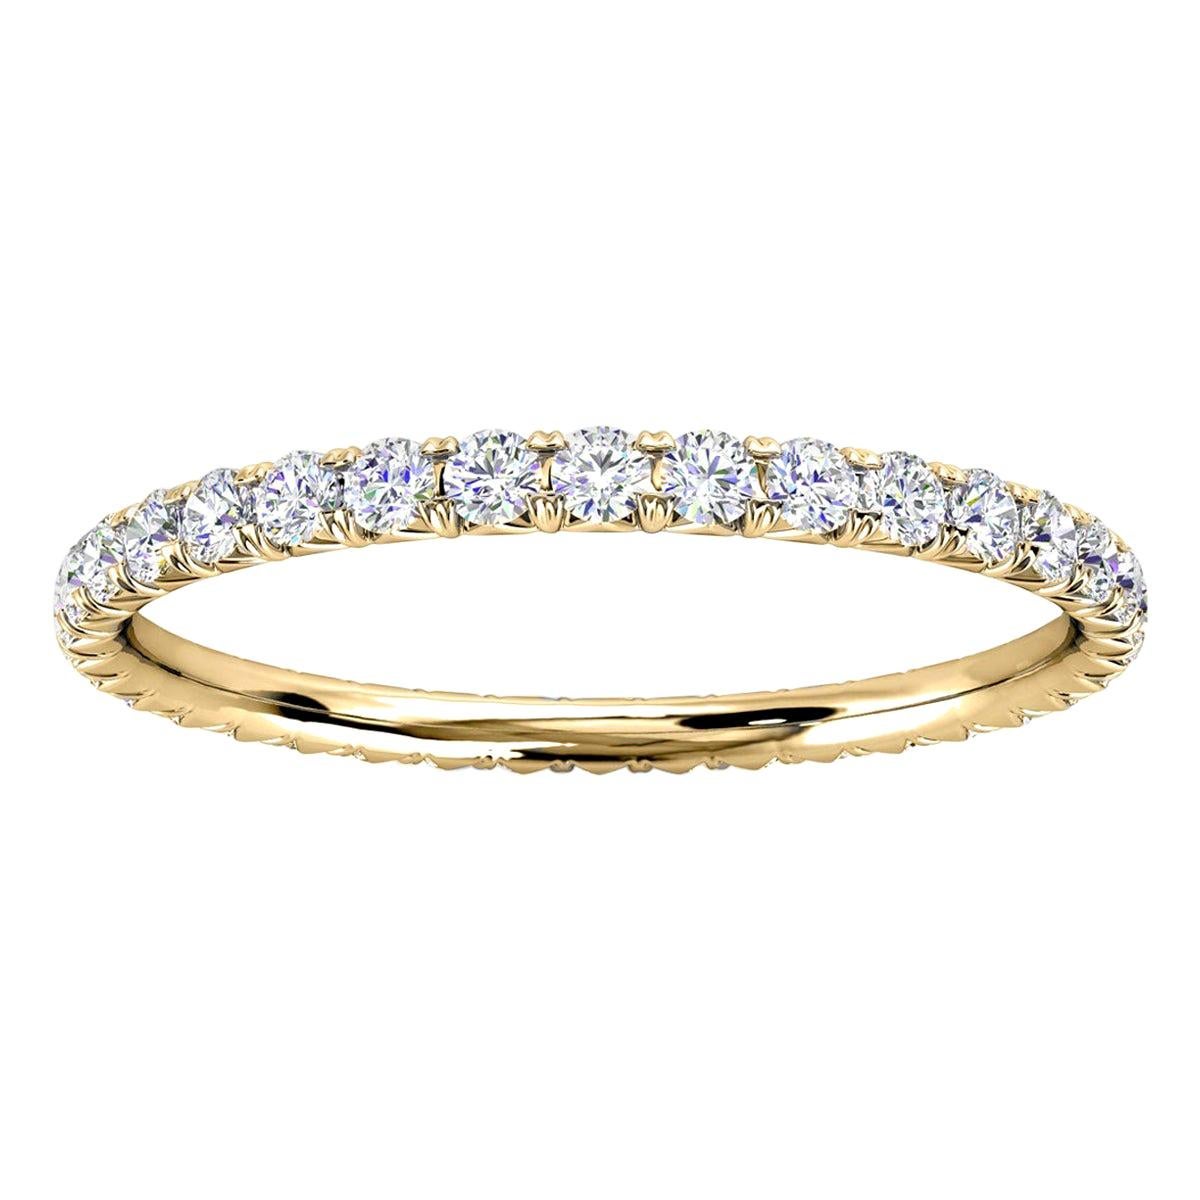 For Sale:  14K Yellow Gold Mia French Pave Diamond Eternity Ring '1/2 Ct. Tw'